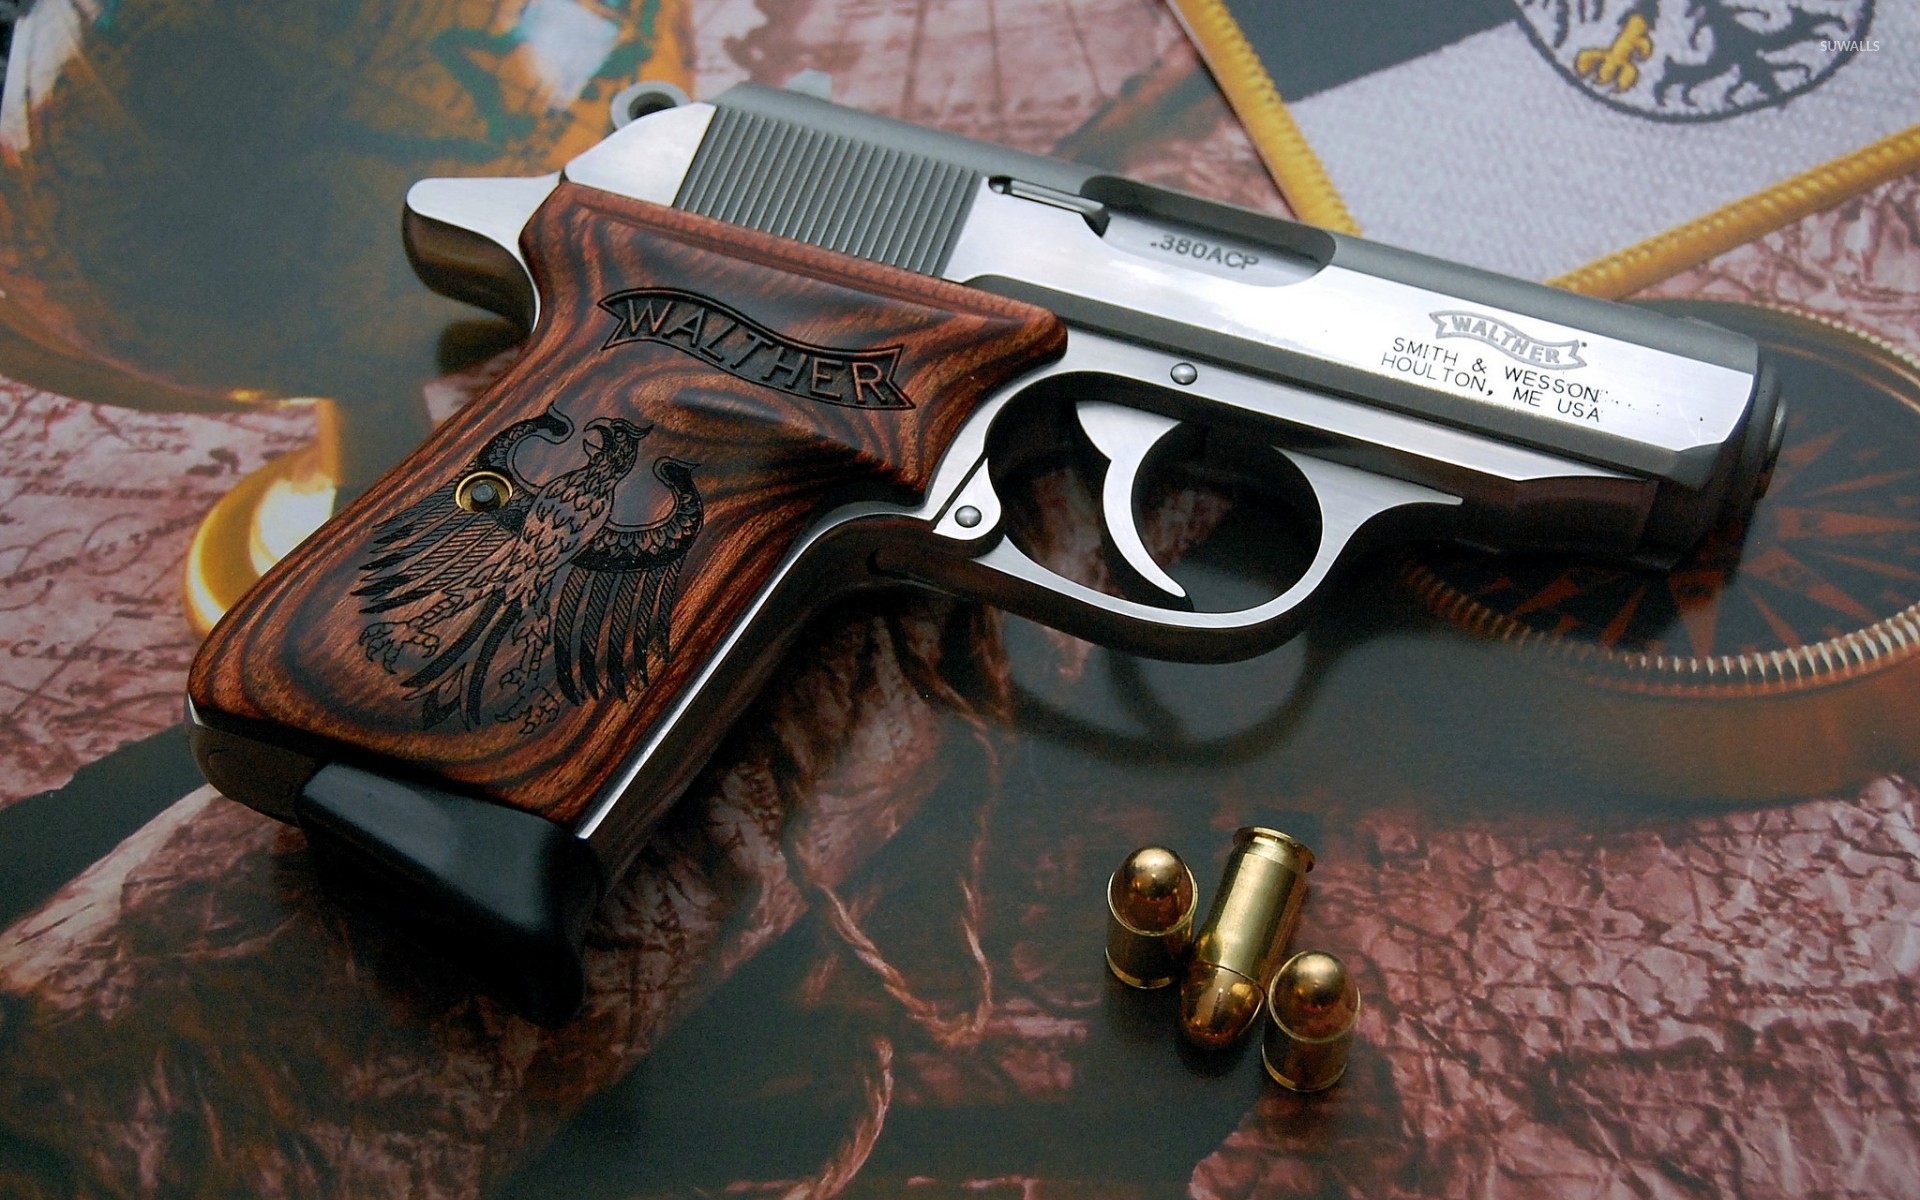 Smith & Wesson Pistol #23